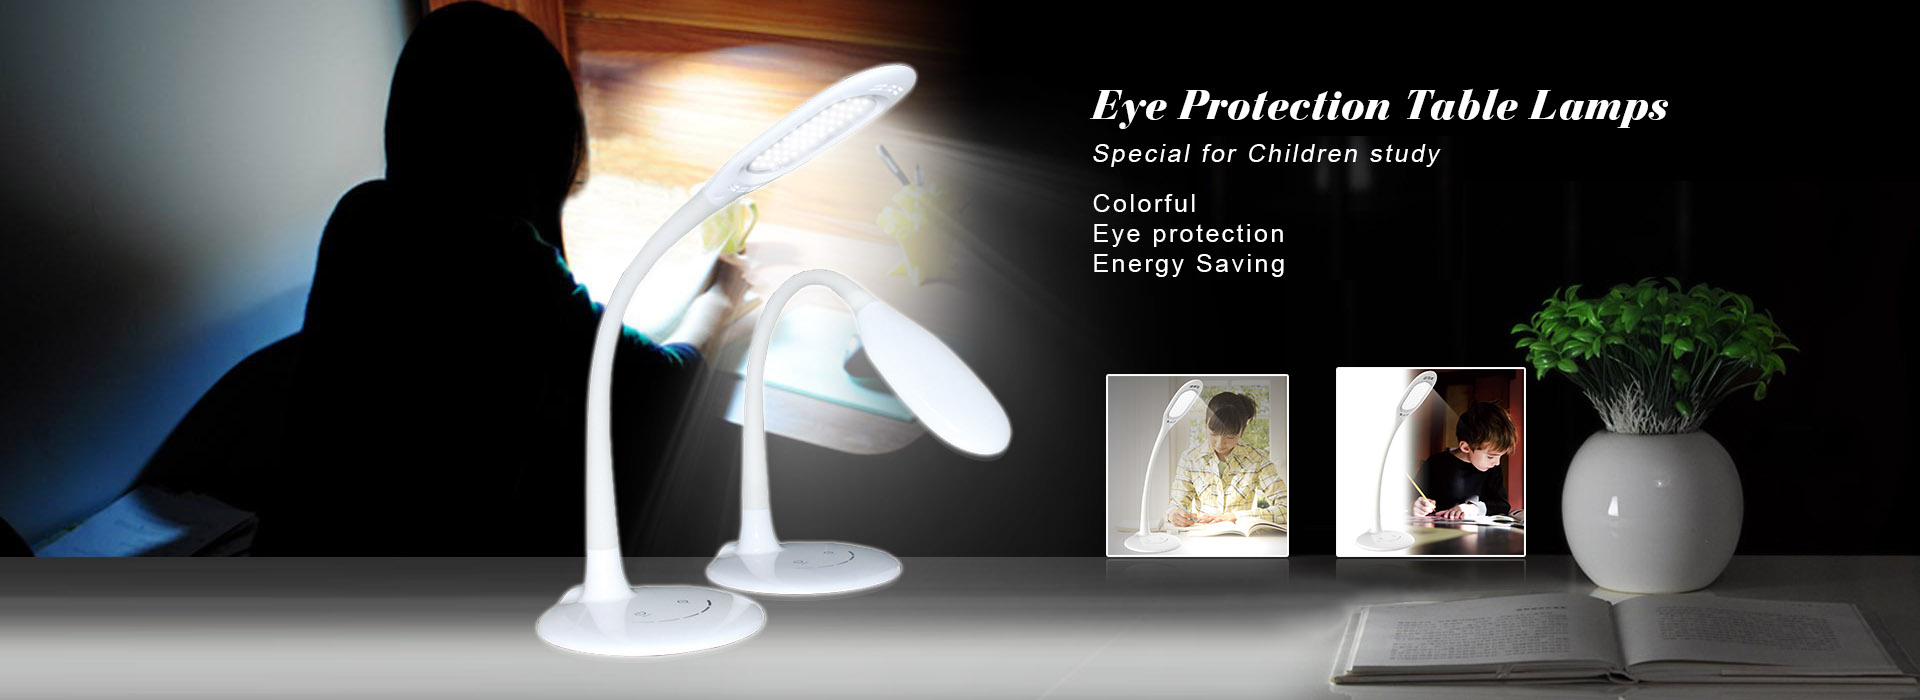 Eye Protection Table Lamps, Special for Children study, Colorful, Eye protection, Energy Saving